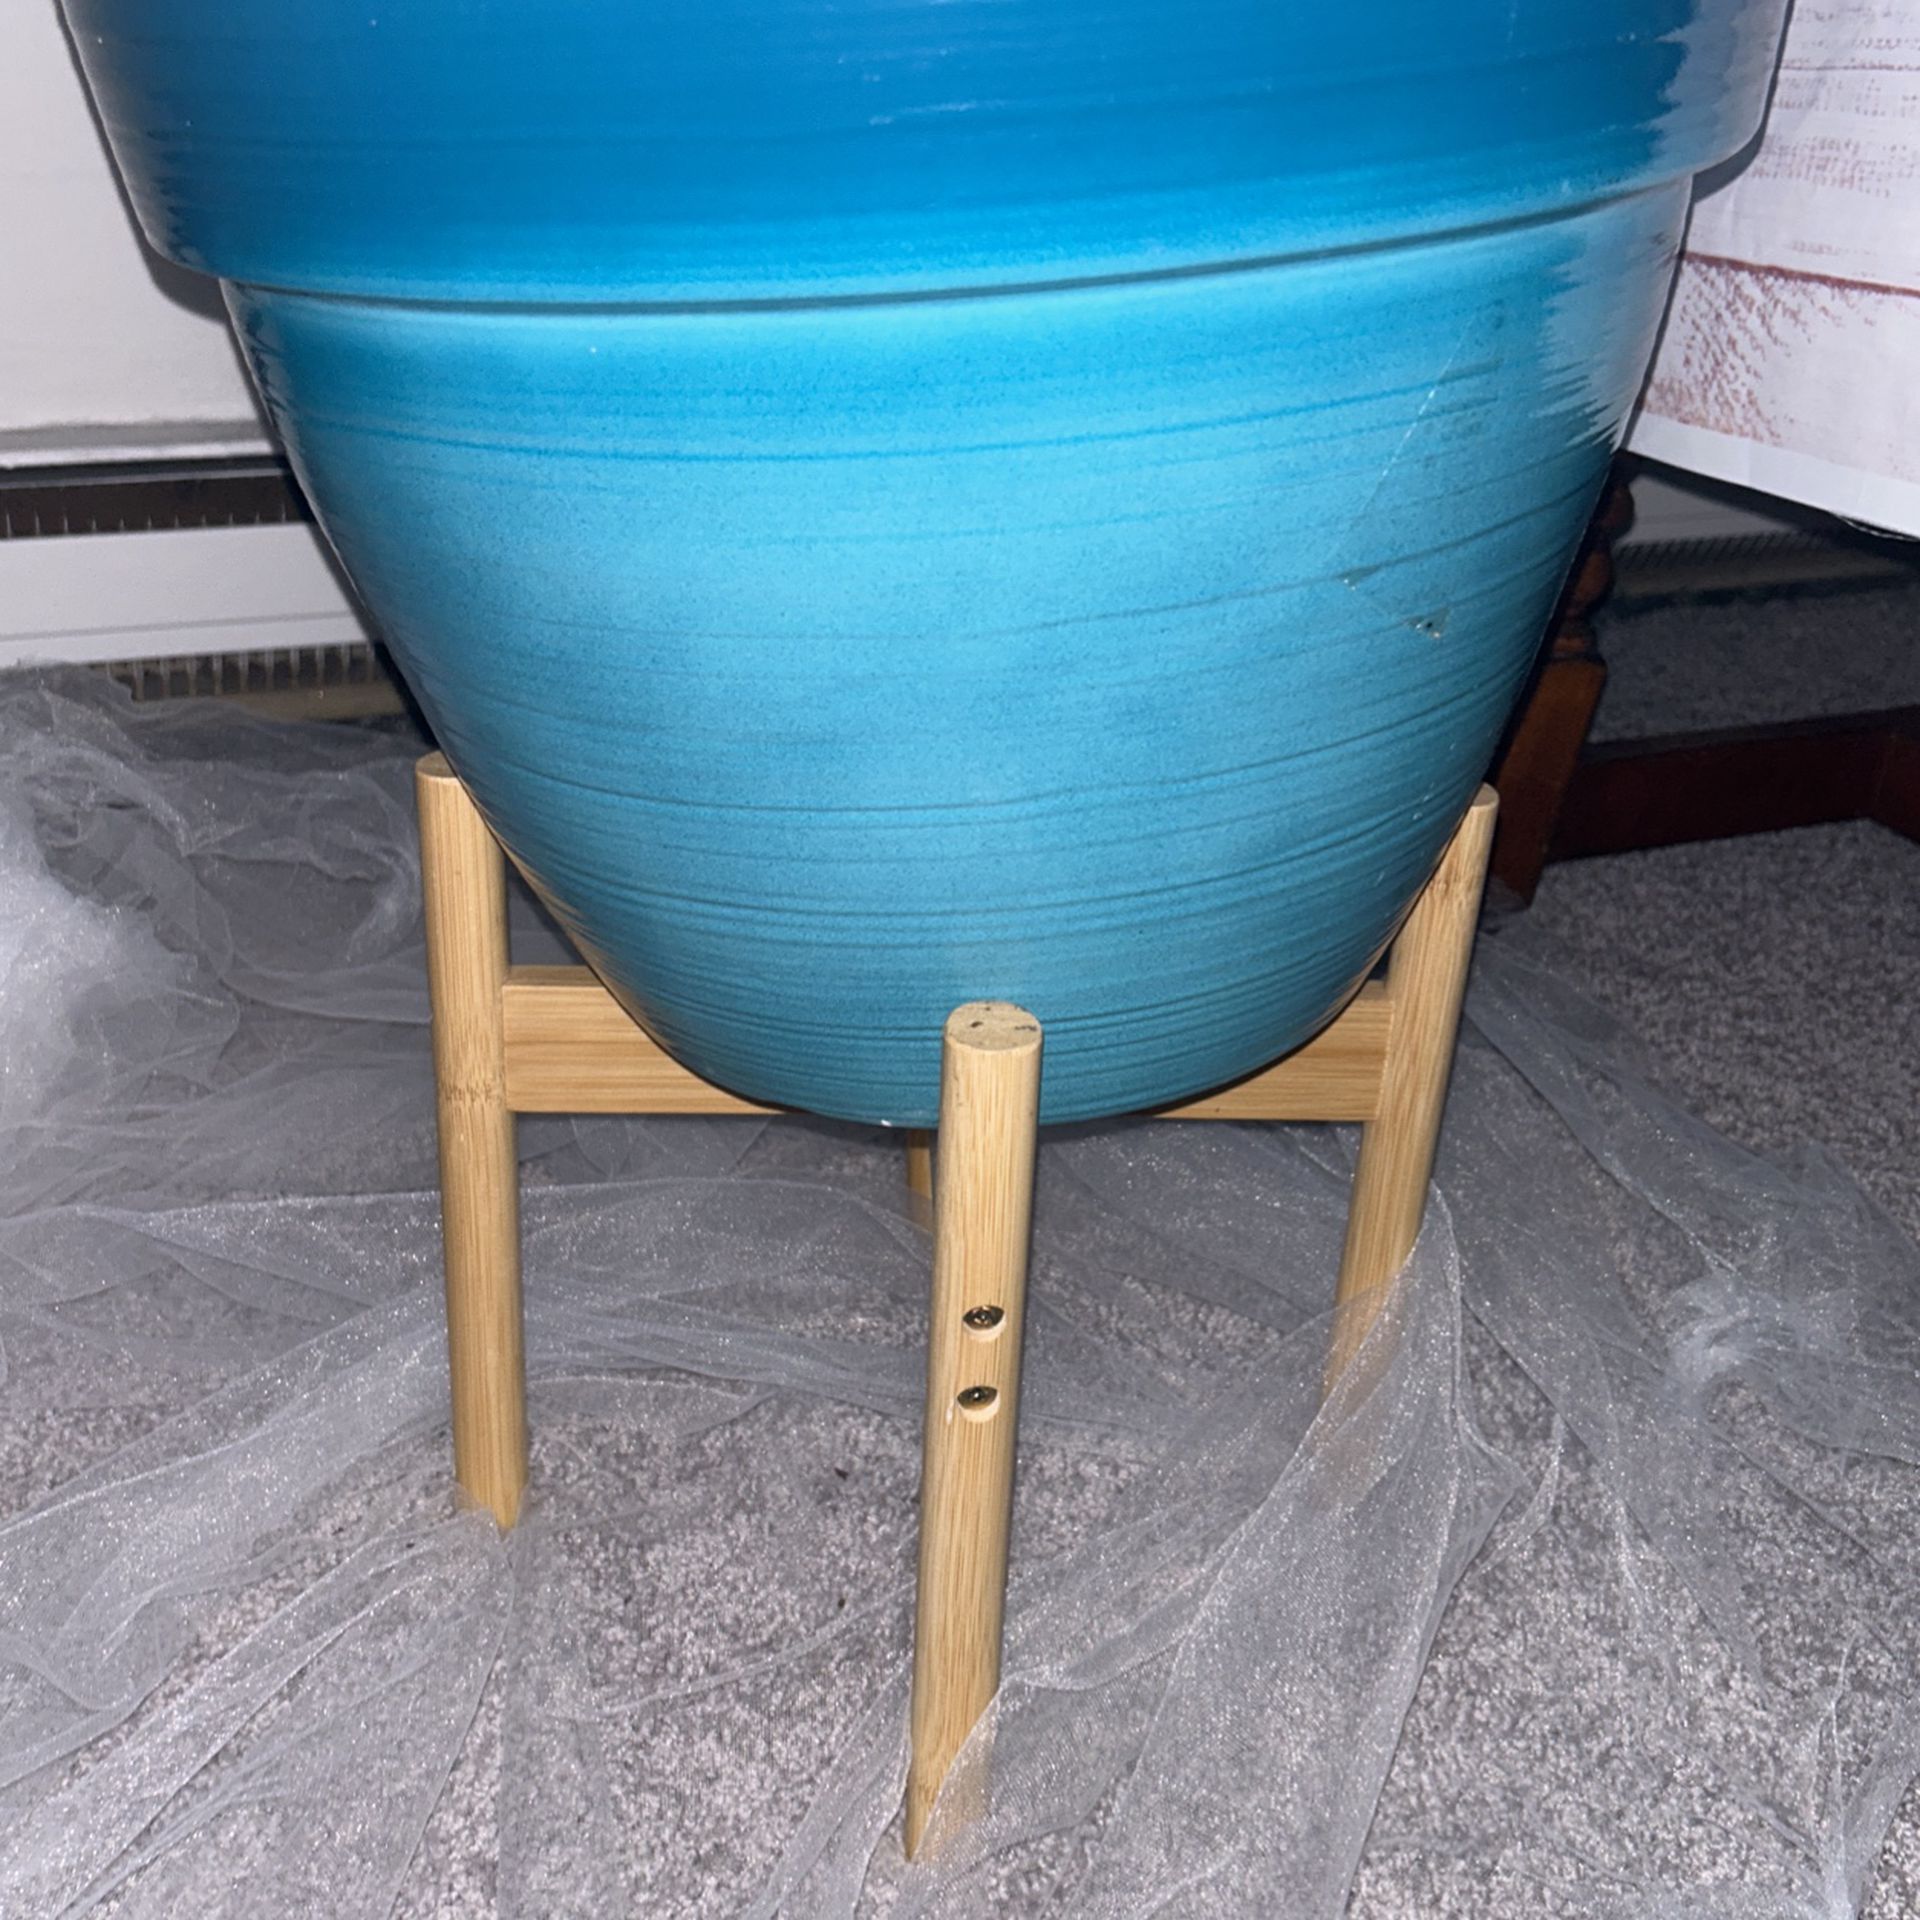 Planter and Stand